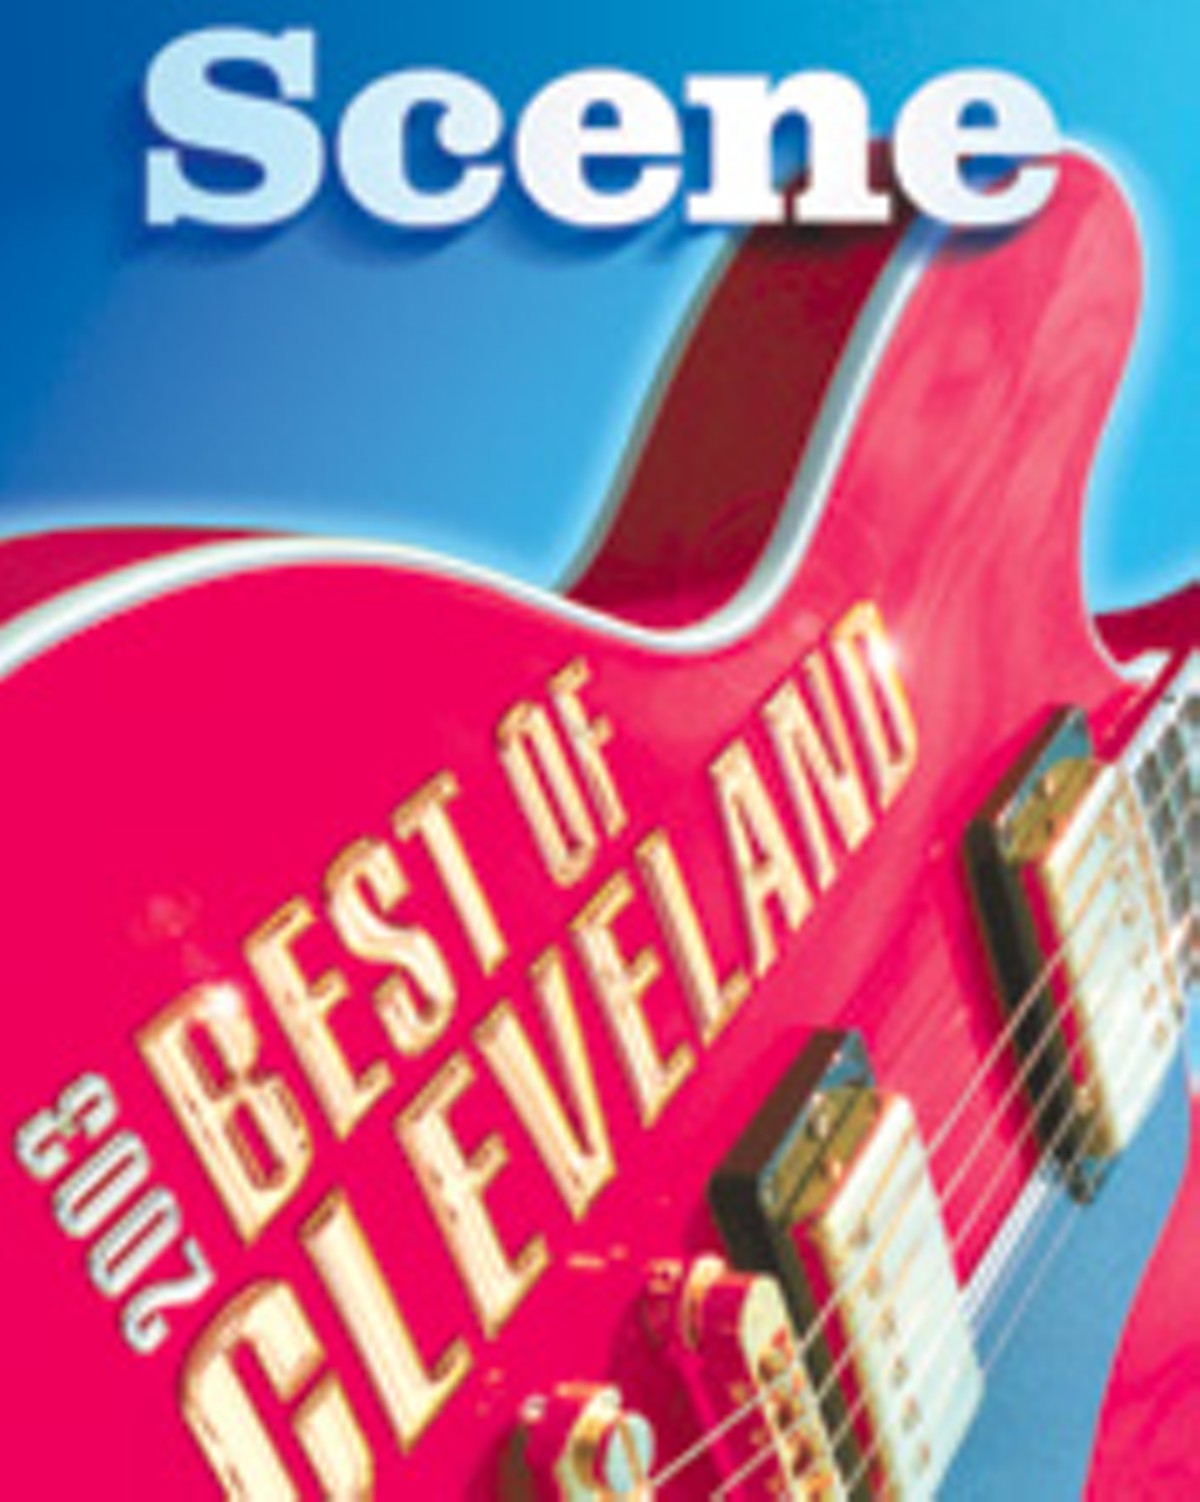 Best of Cleveland 2003 Issue Cover